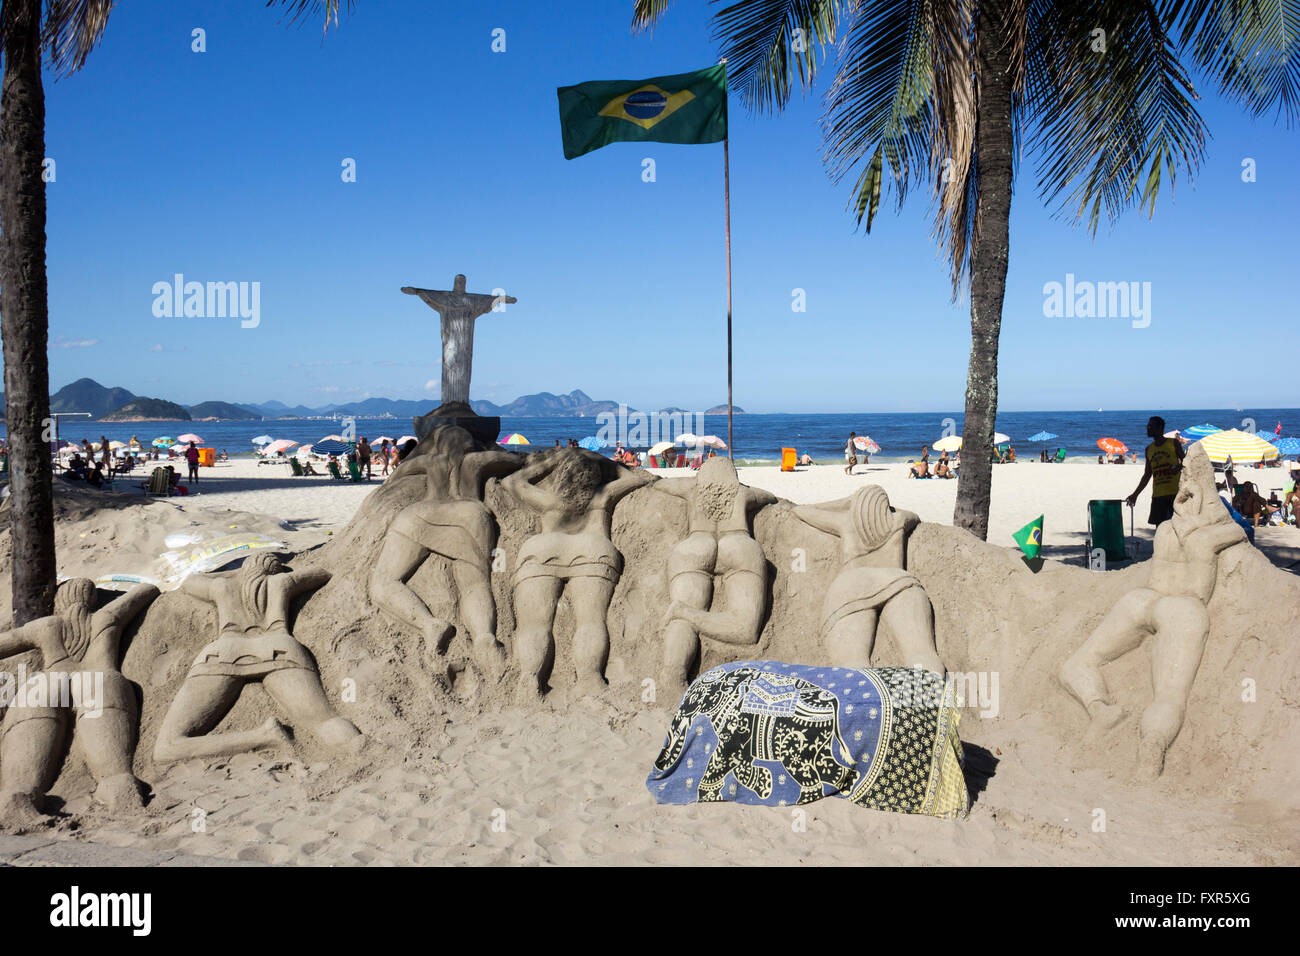 Rio de Janeiro, Brazil, 17 April 2016: Thousands of demonstrators protesting in favor of impeachment of Rousseff in Copacabana. This day is being voted on by deputies to be open the impeachment process to oust President Dilma Rousseff. Credit:  Luiz Souza/Alamy Live News Stock Photo